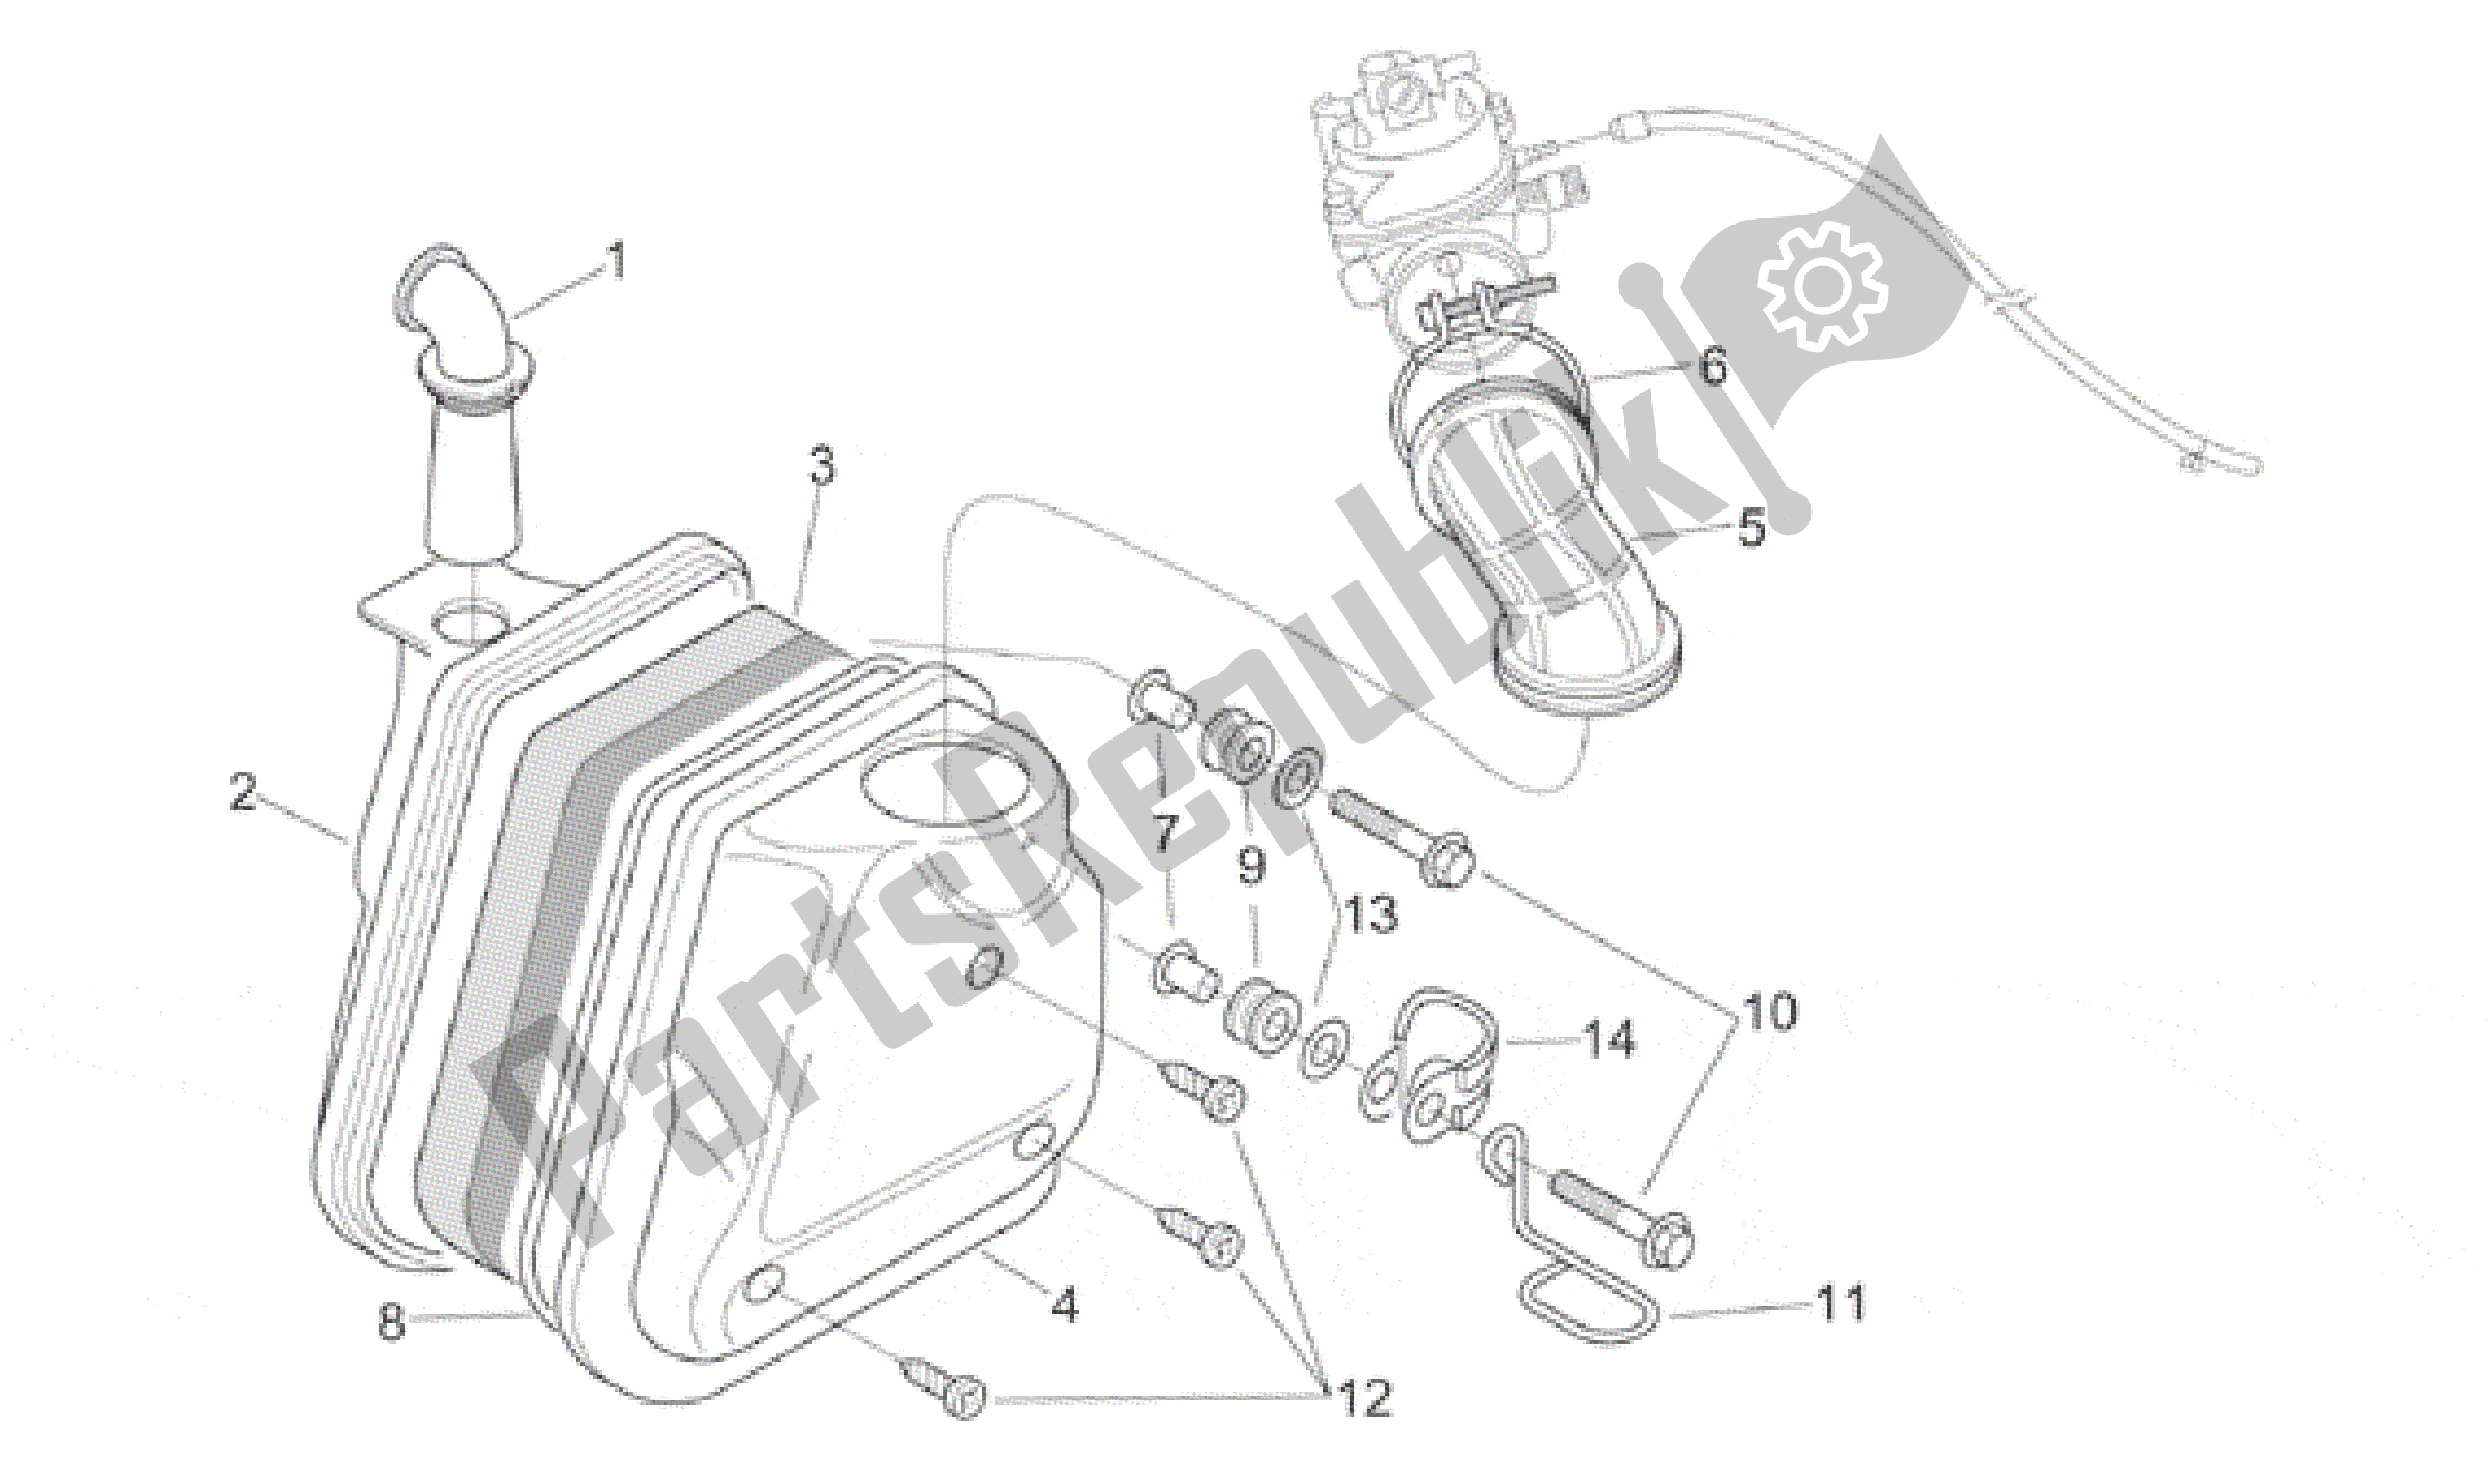 All parts for the Air Box of the Aprilia Sonic 50 1998 - 2001